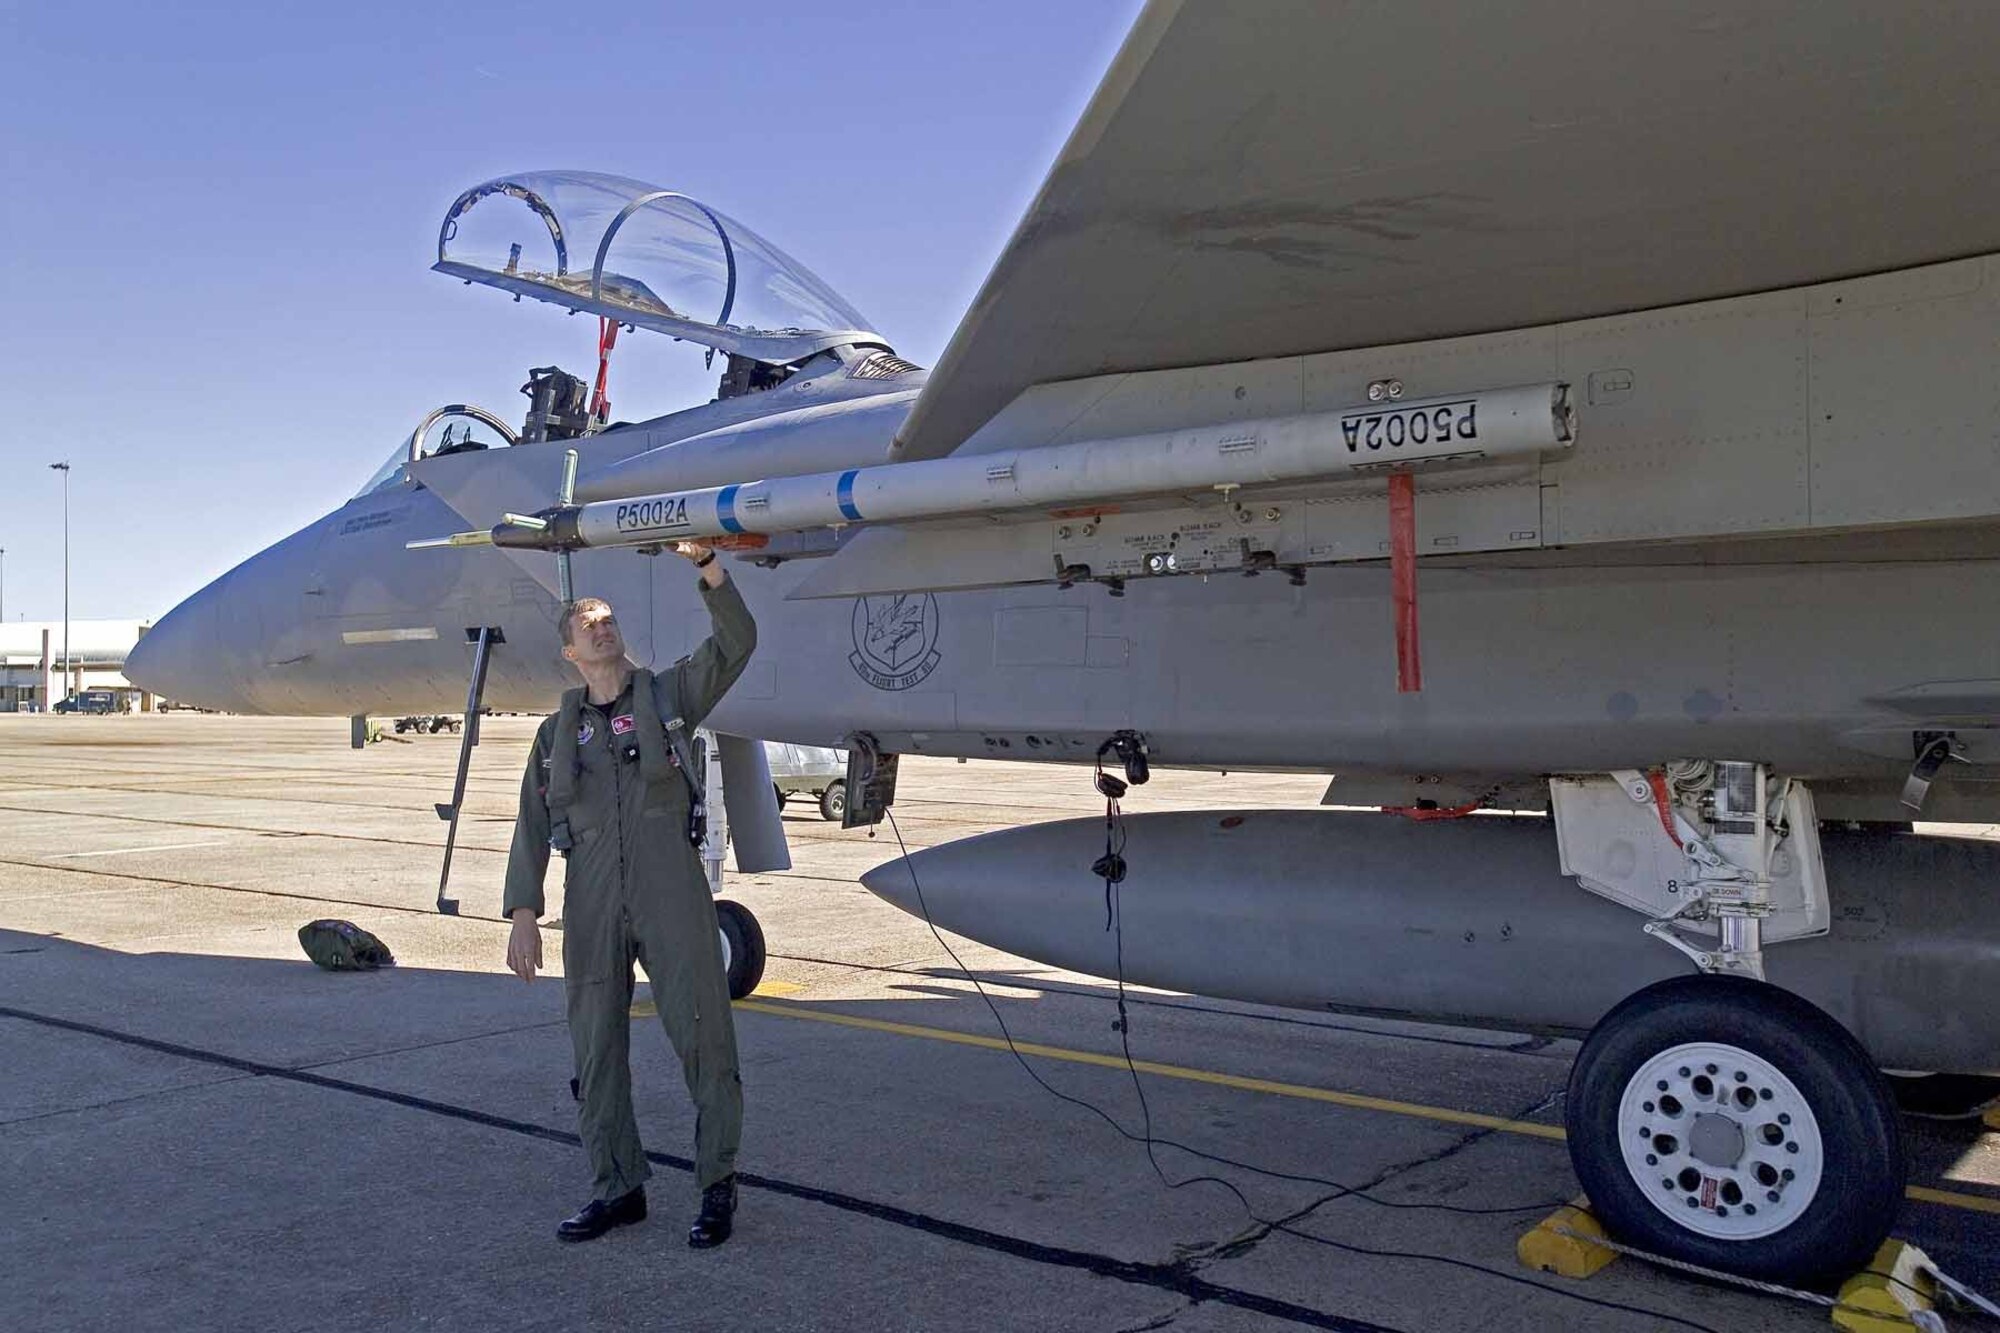 EGLIN AIR FORCE BASE, Fla.  — Lt. Col. Glenn Graham, 40th Flight Test Squadron commander, inspects the P5 Combat Training System before taking it out on a flight test.  (Photo courtesy of Cubic Corporation)

